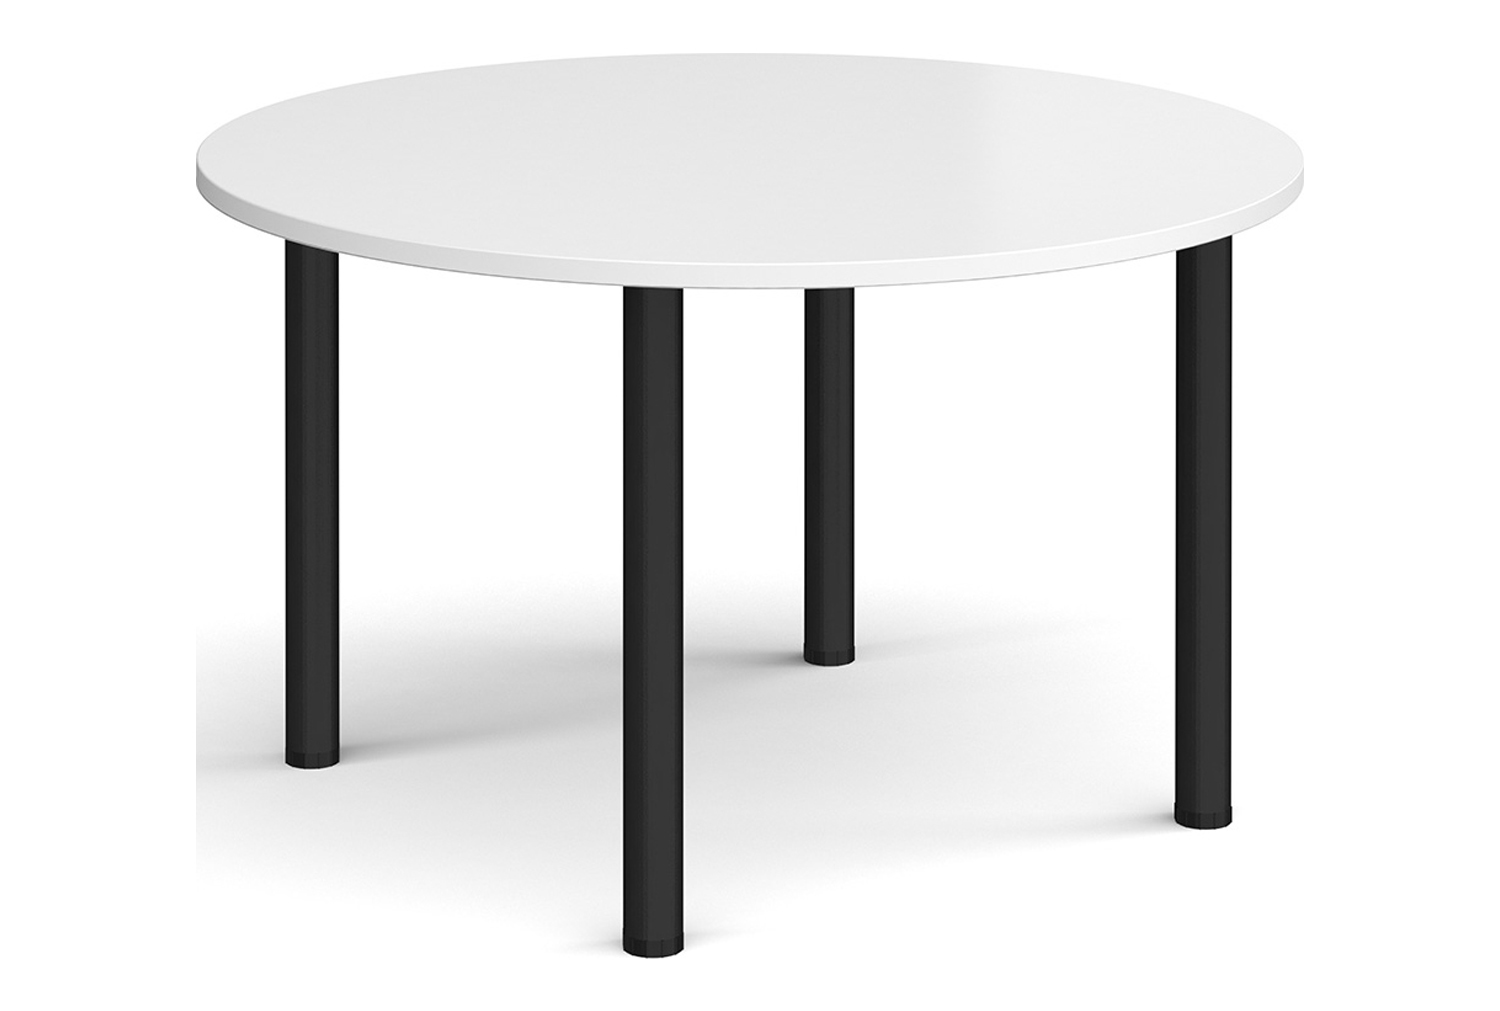 Rosetti Round Meeting Table, 120diax73h (cm), White, Fully Installed